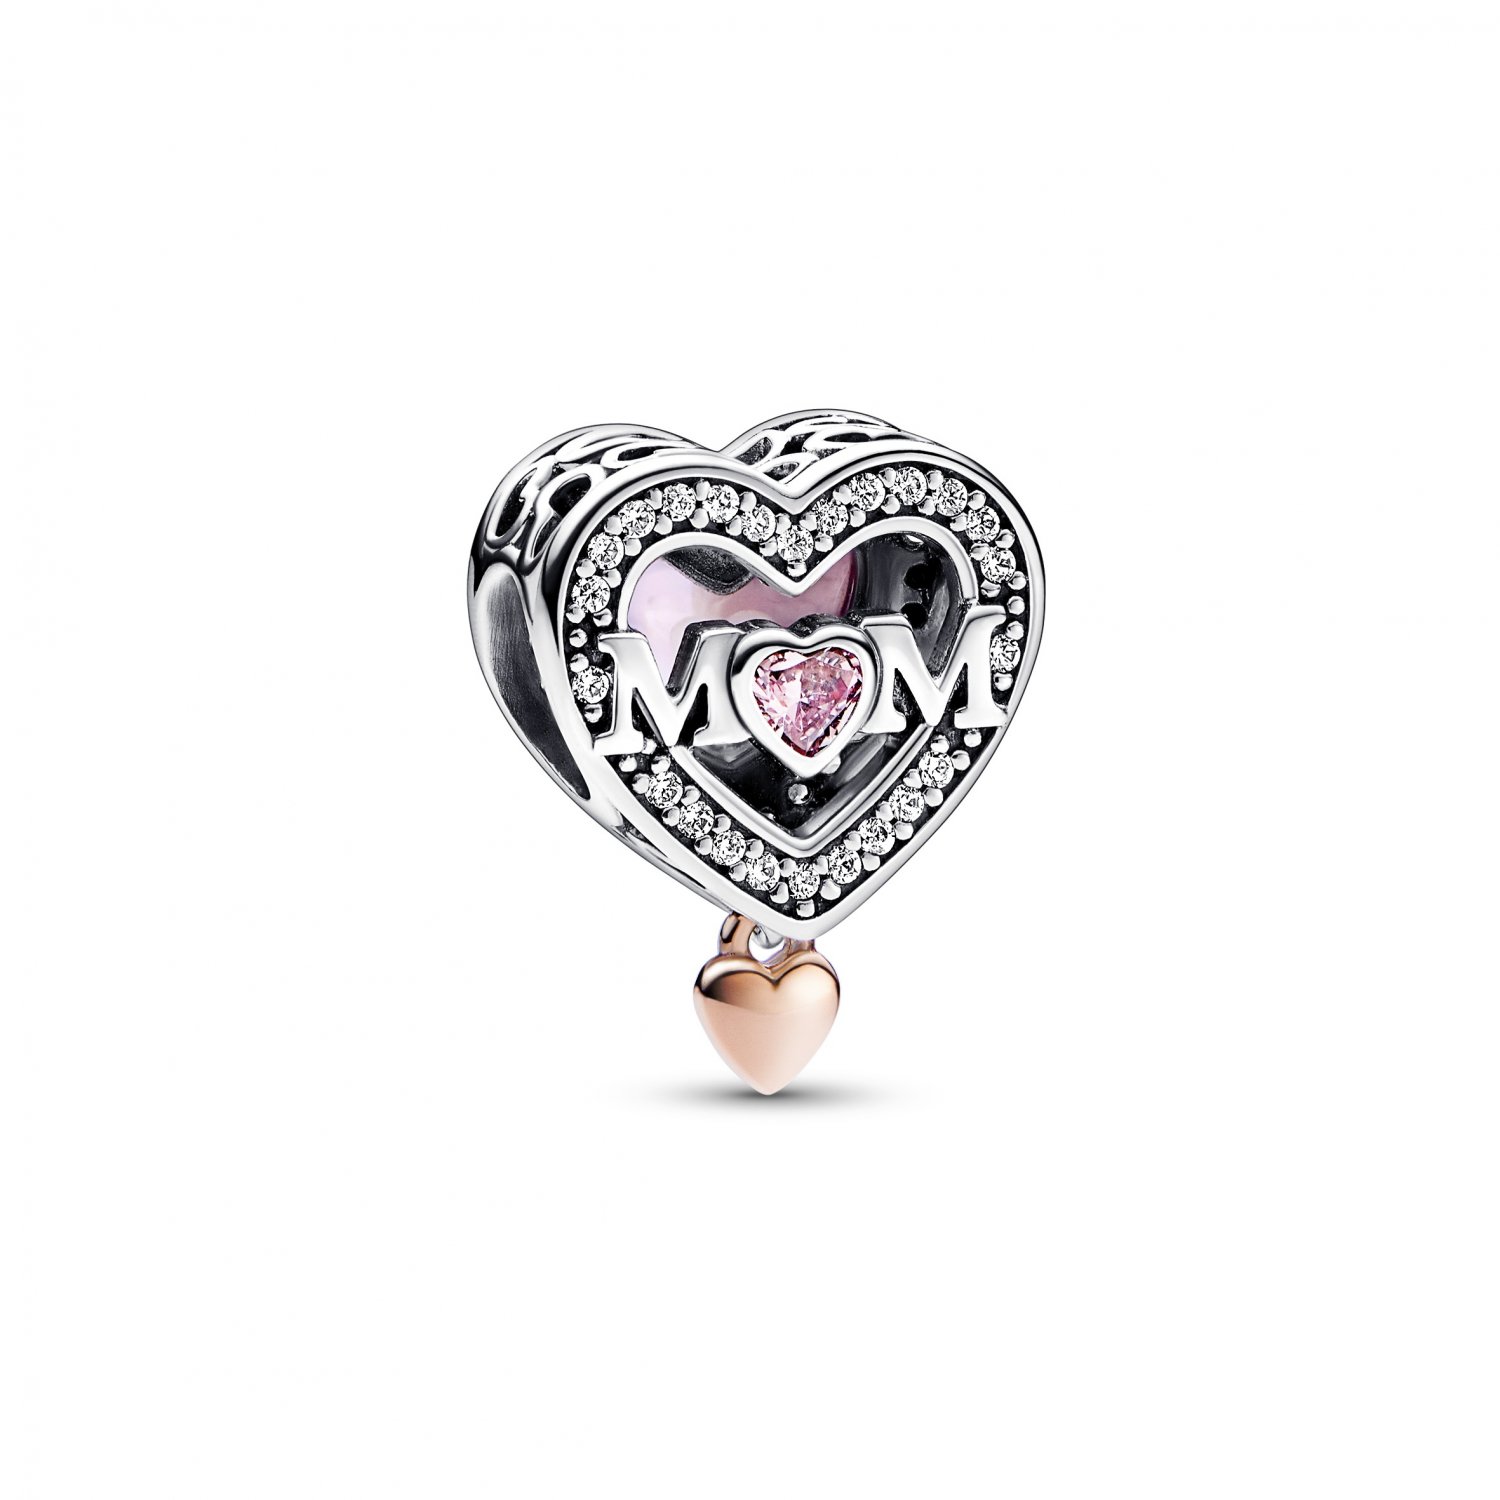 Mum heart sterling silver and 14k rose gold-plated charm wit